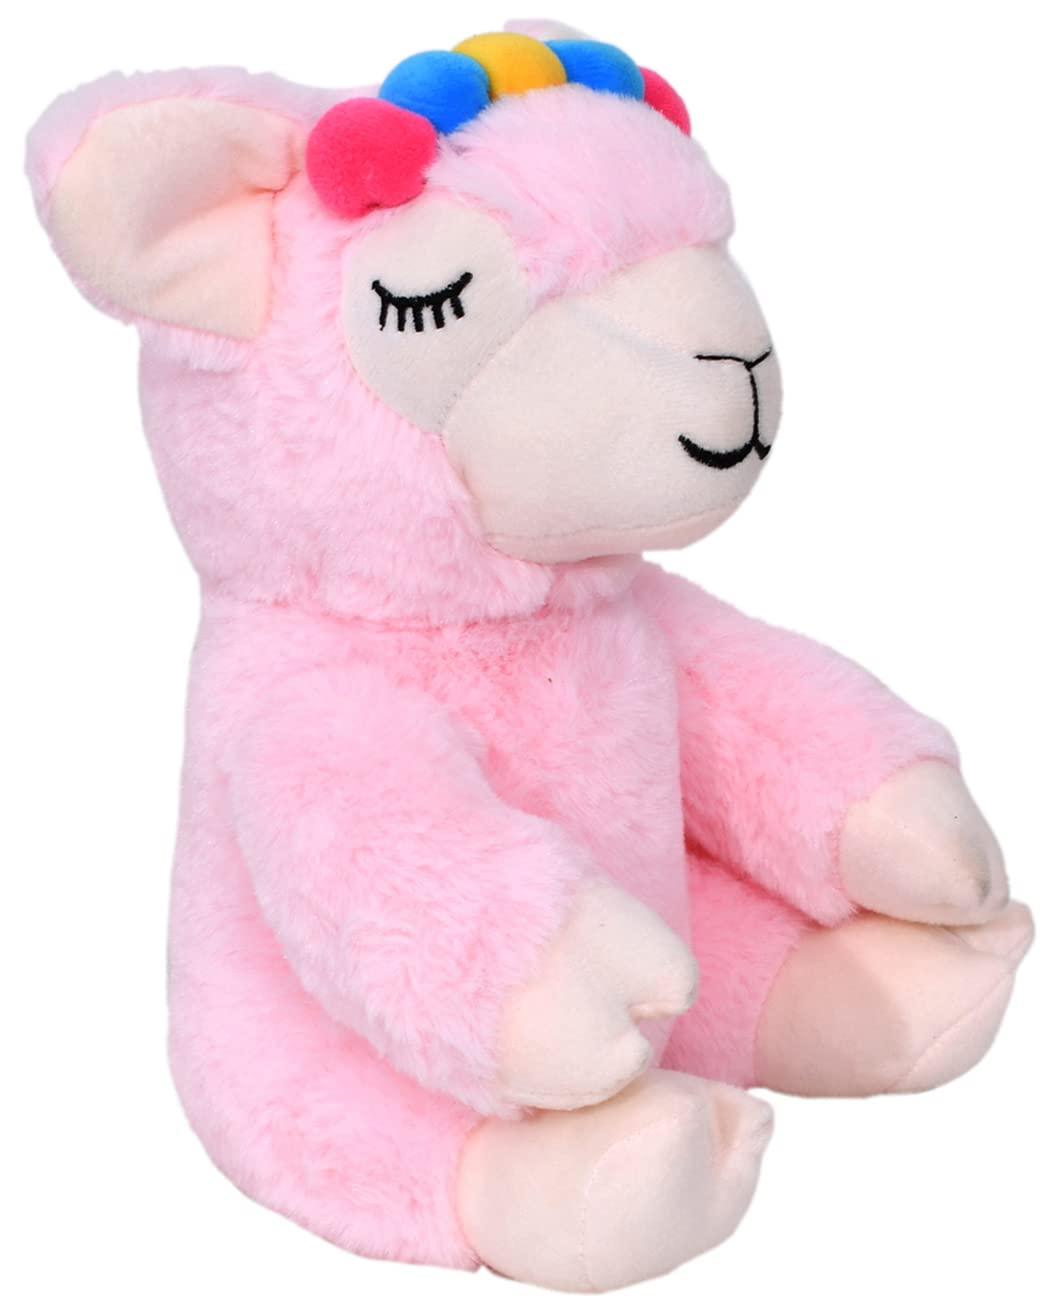 Mirada Cute Pink Llama Coin Bank Soft Toy, Best Gift for Girls